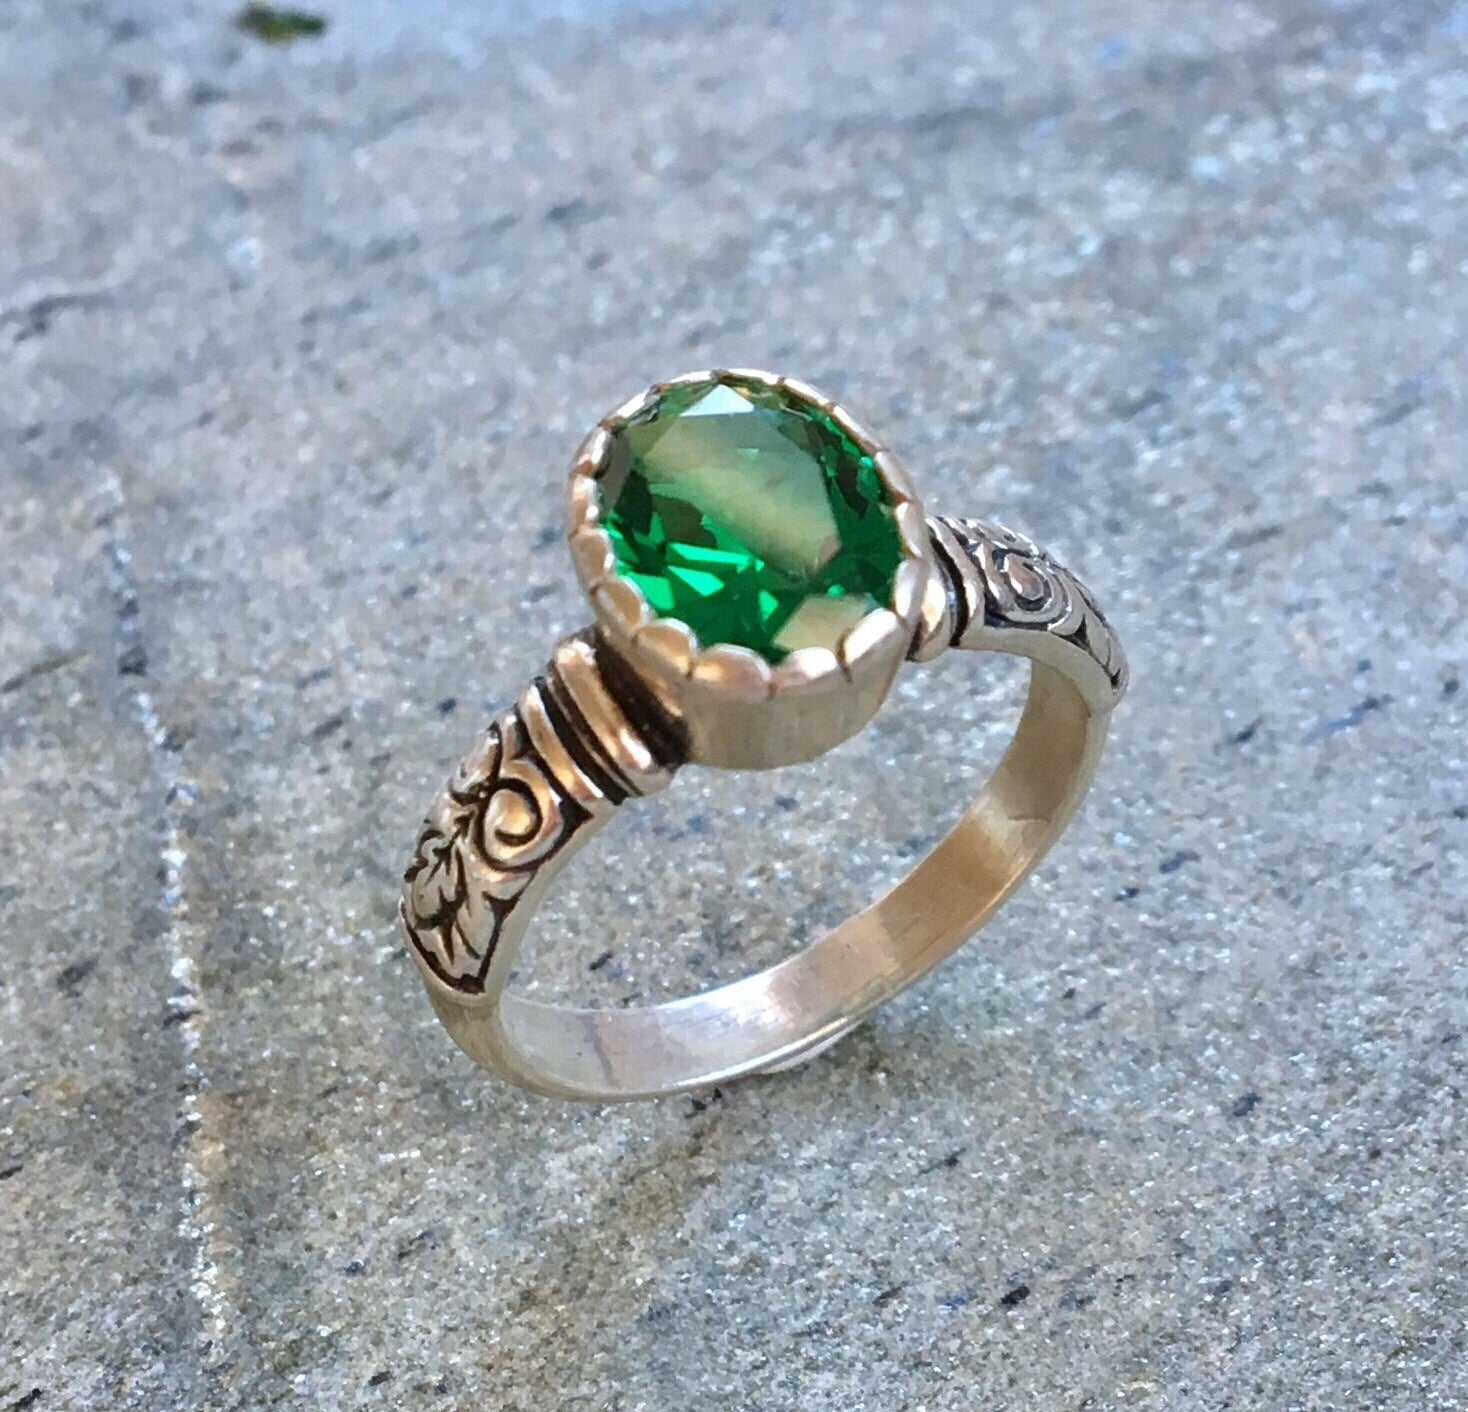 Tribal Emerald Ring - Green Solitaire Ring, Green Vintage Ring